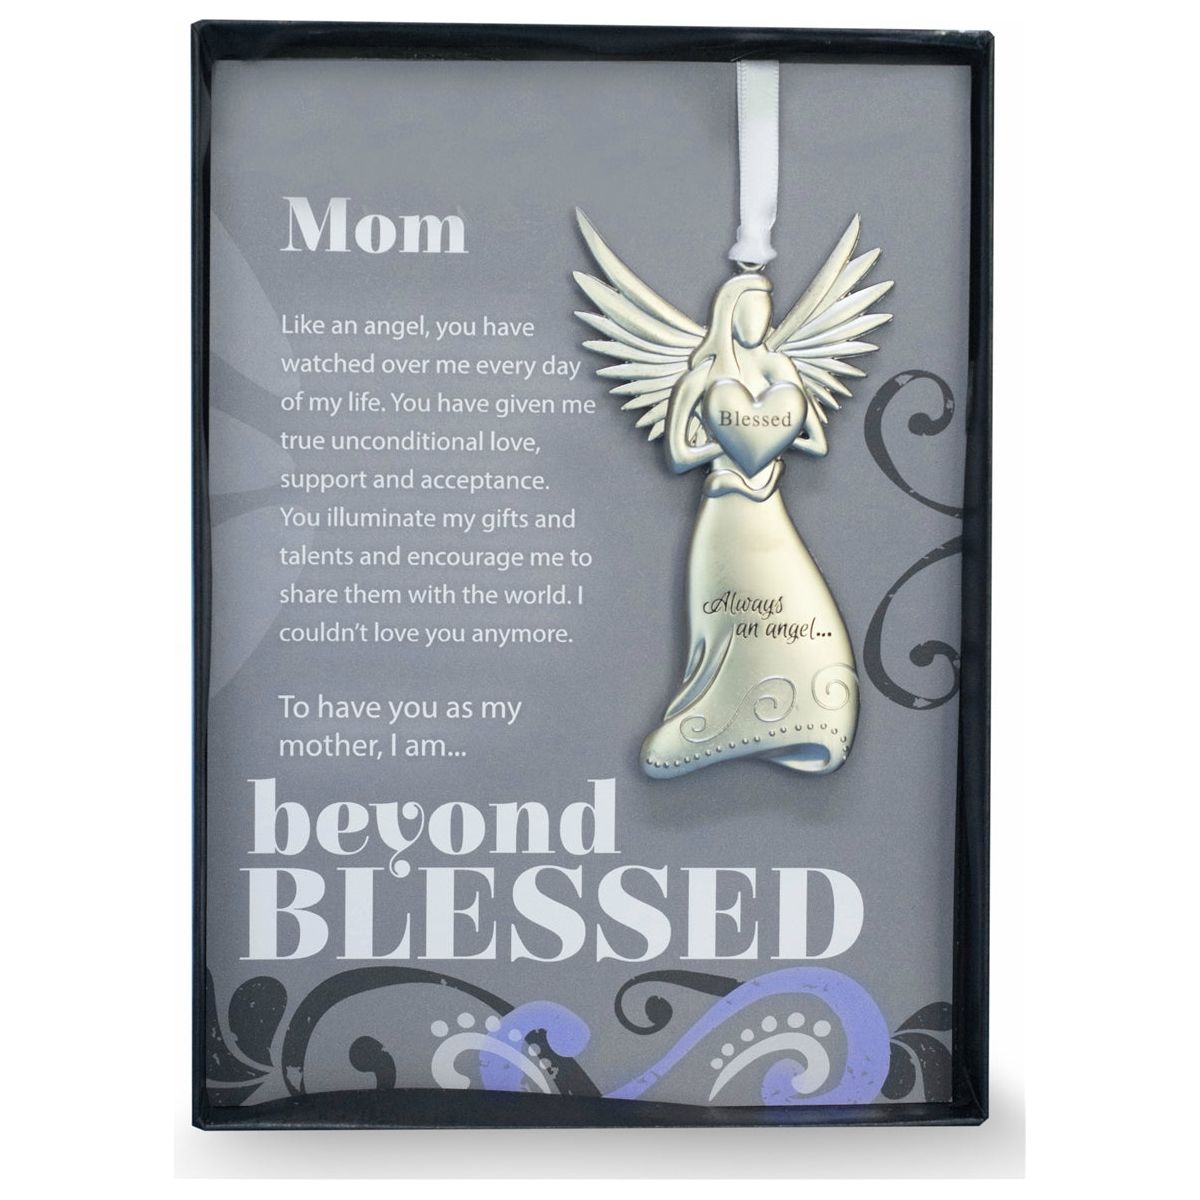 Gift for Mom- 4" metal blessed angel ornament with "Mom" Beyond Blessed sentiment in black gift box with clear lid.